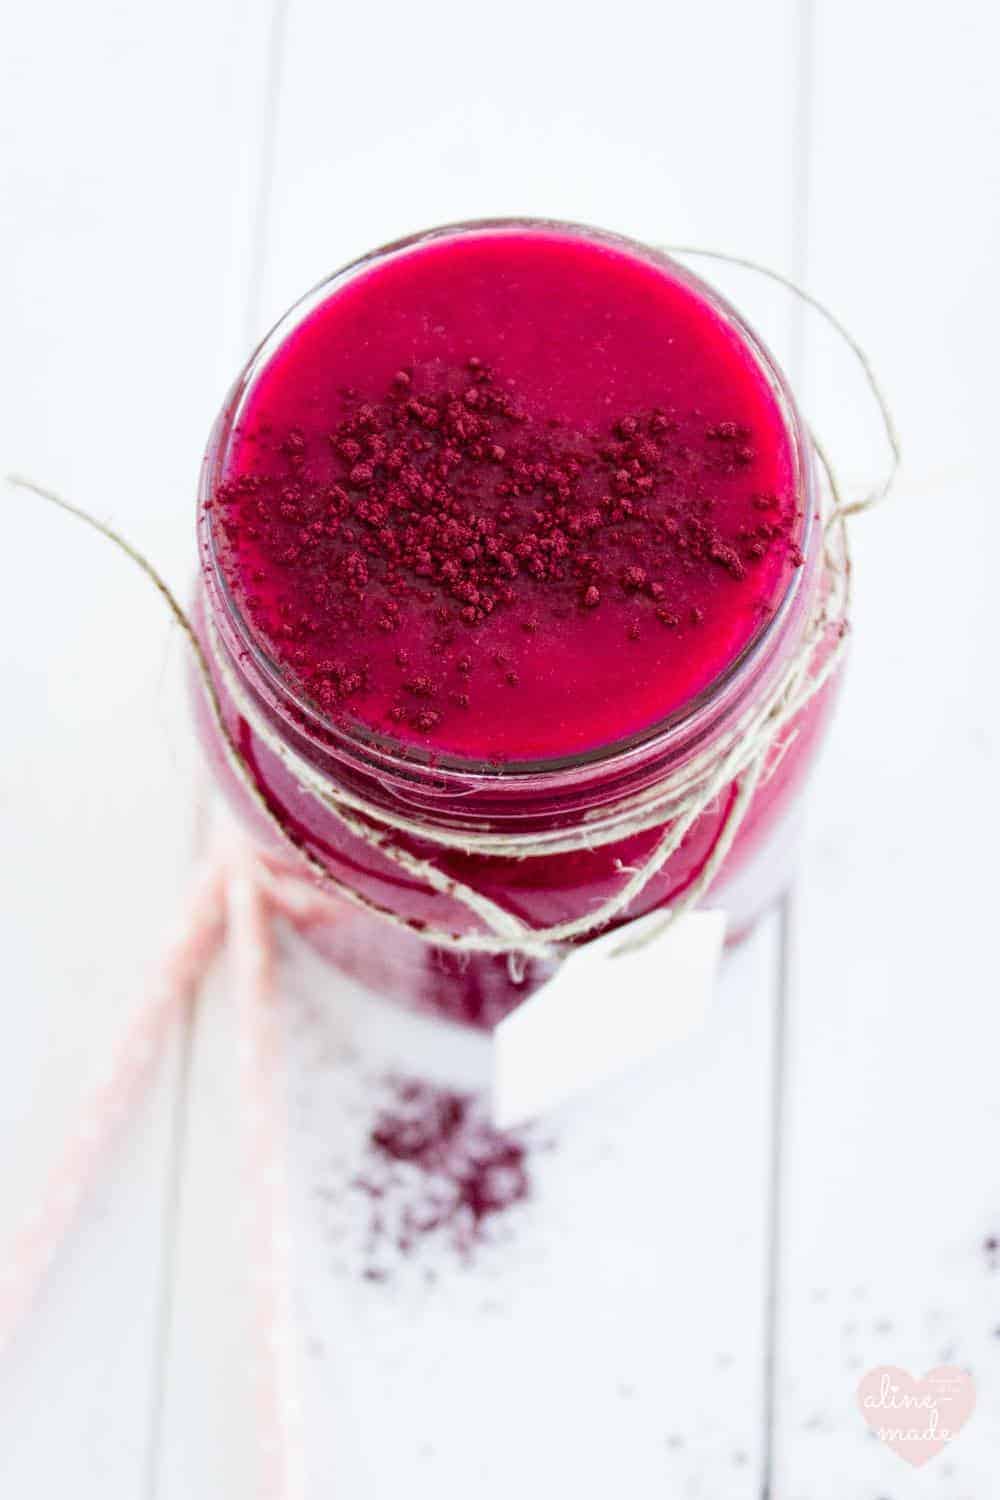 Apple and Beetroot Smoothie - Amazing Purple Color